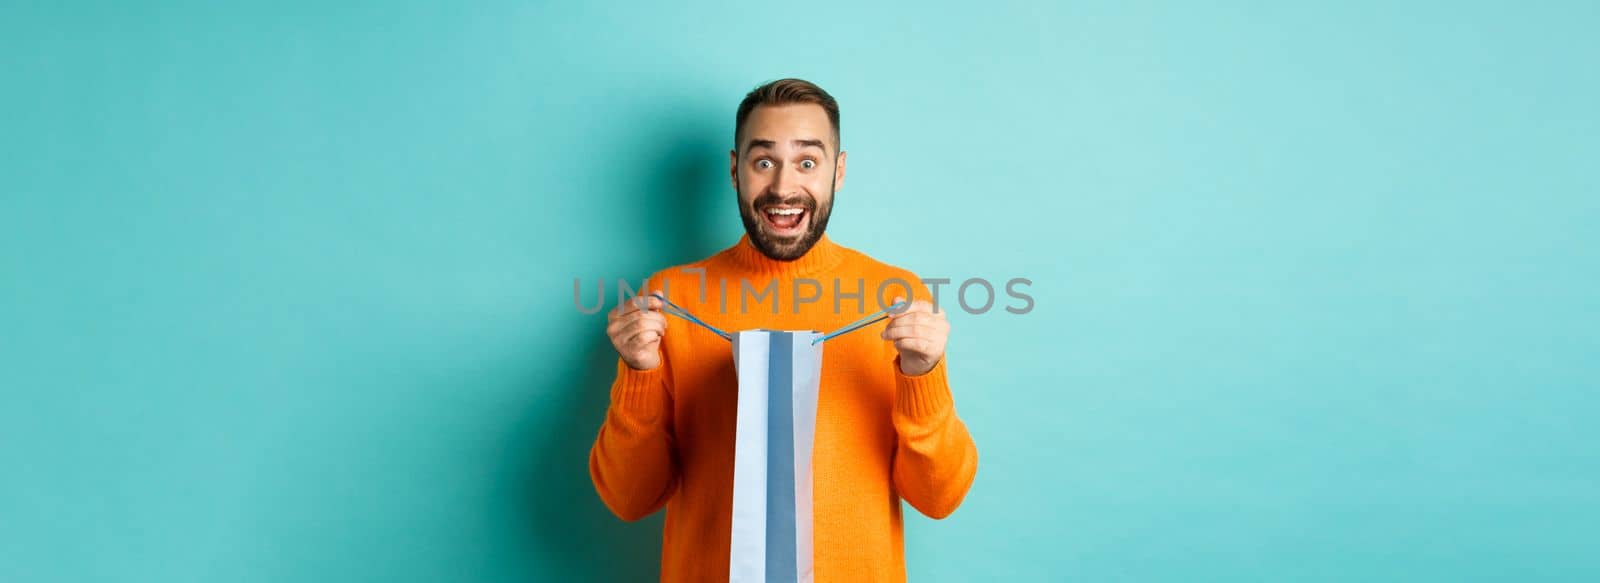 Surprised man open shopping bag and looking amazed, receiving gift on holiday, standing over turquoise background.